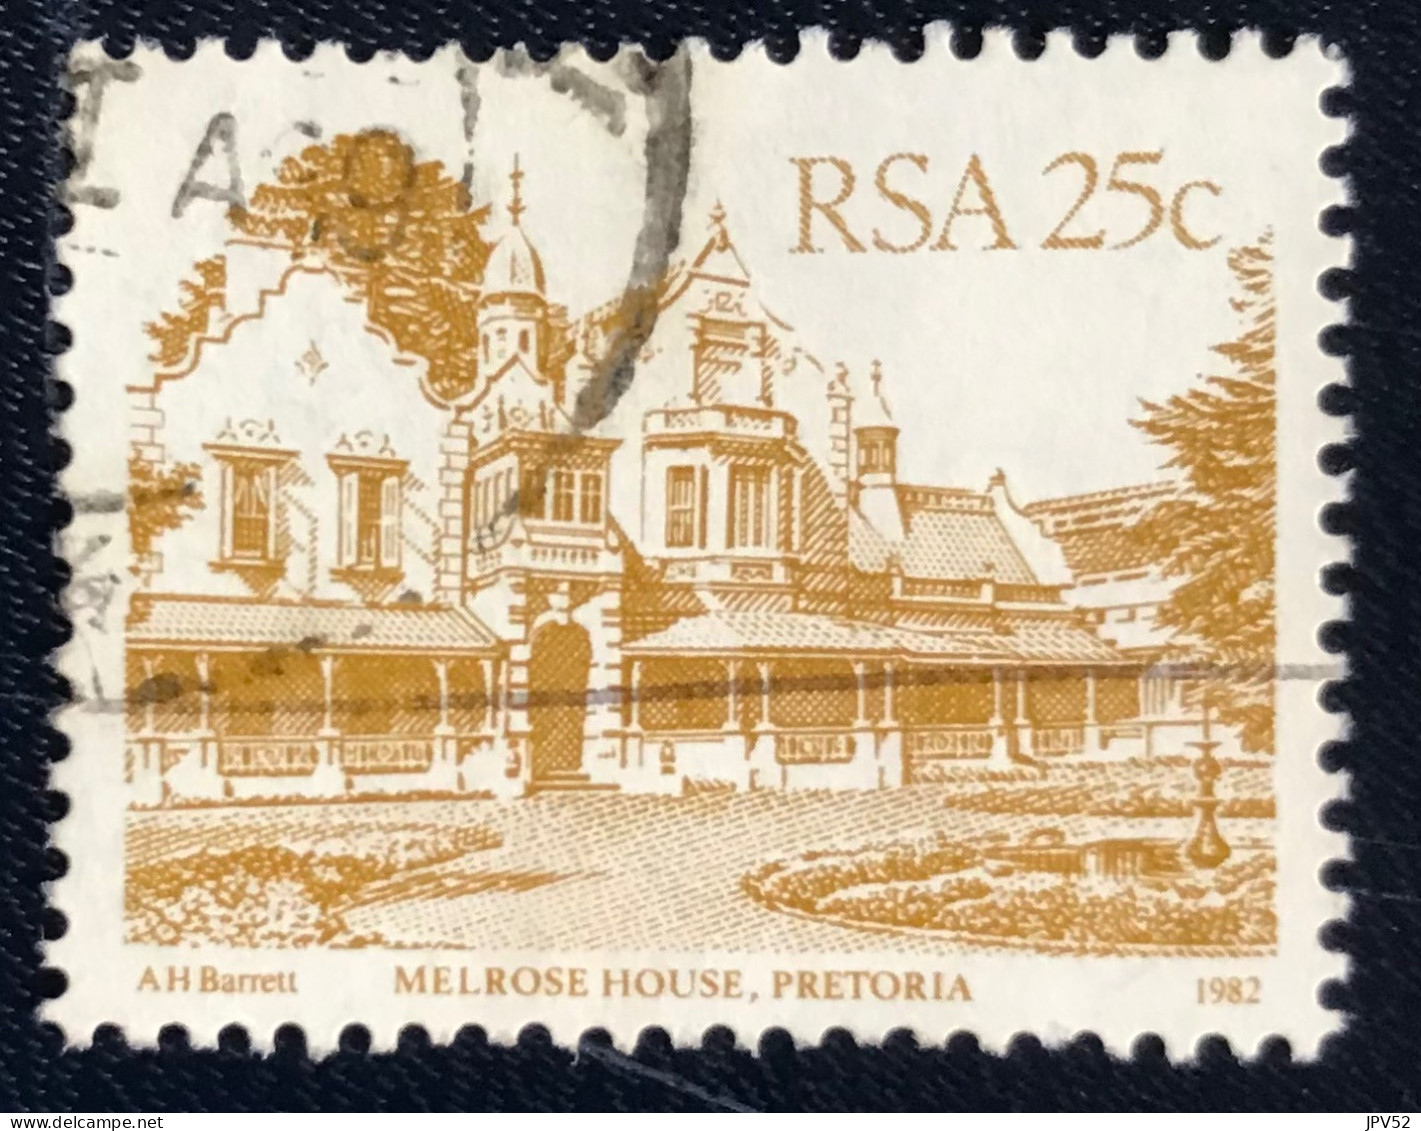 RSA - South Africa - Suid-Afrika - C18/9 - 1982 - (°)used - Michel 613 - Gebouwen - Melrose House - Used Stamps